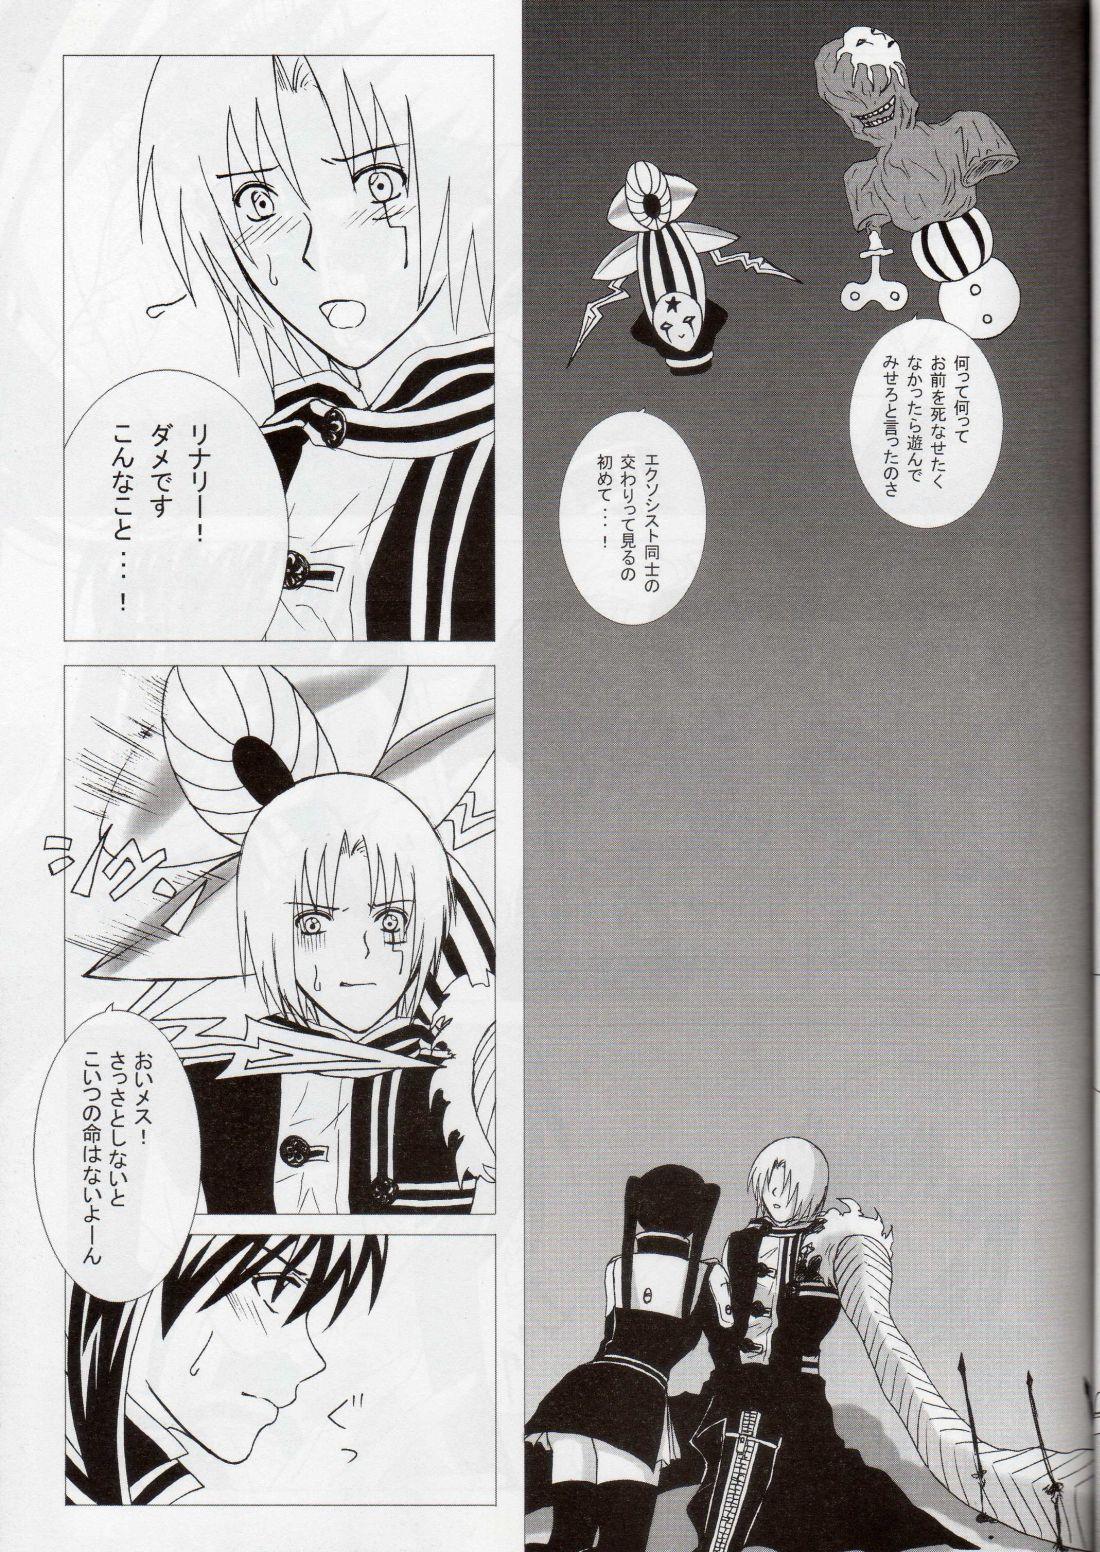 Sensual Star Shaft - D.gray man Interview - Page 8